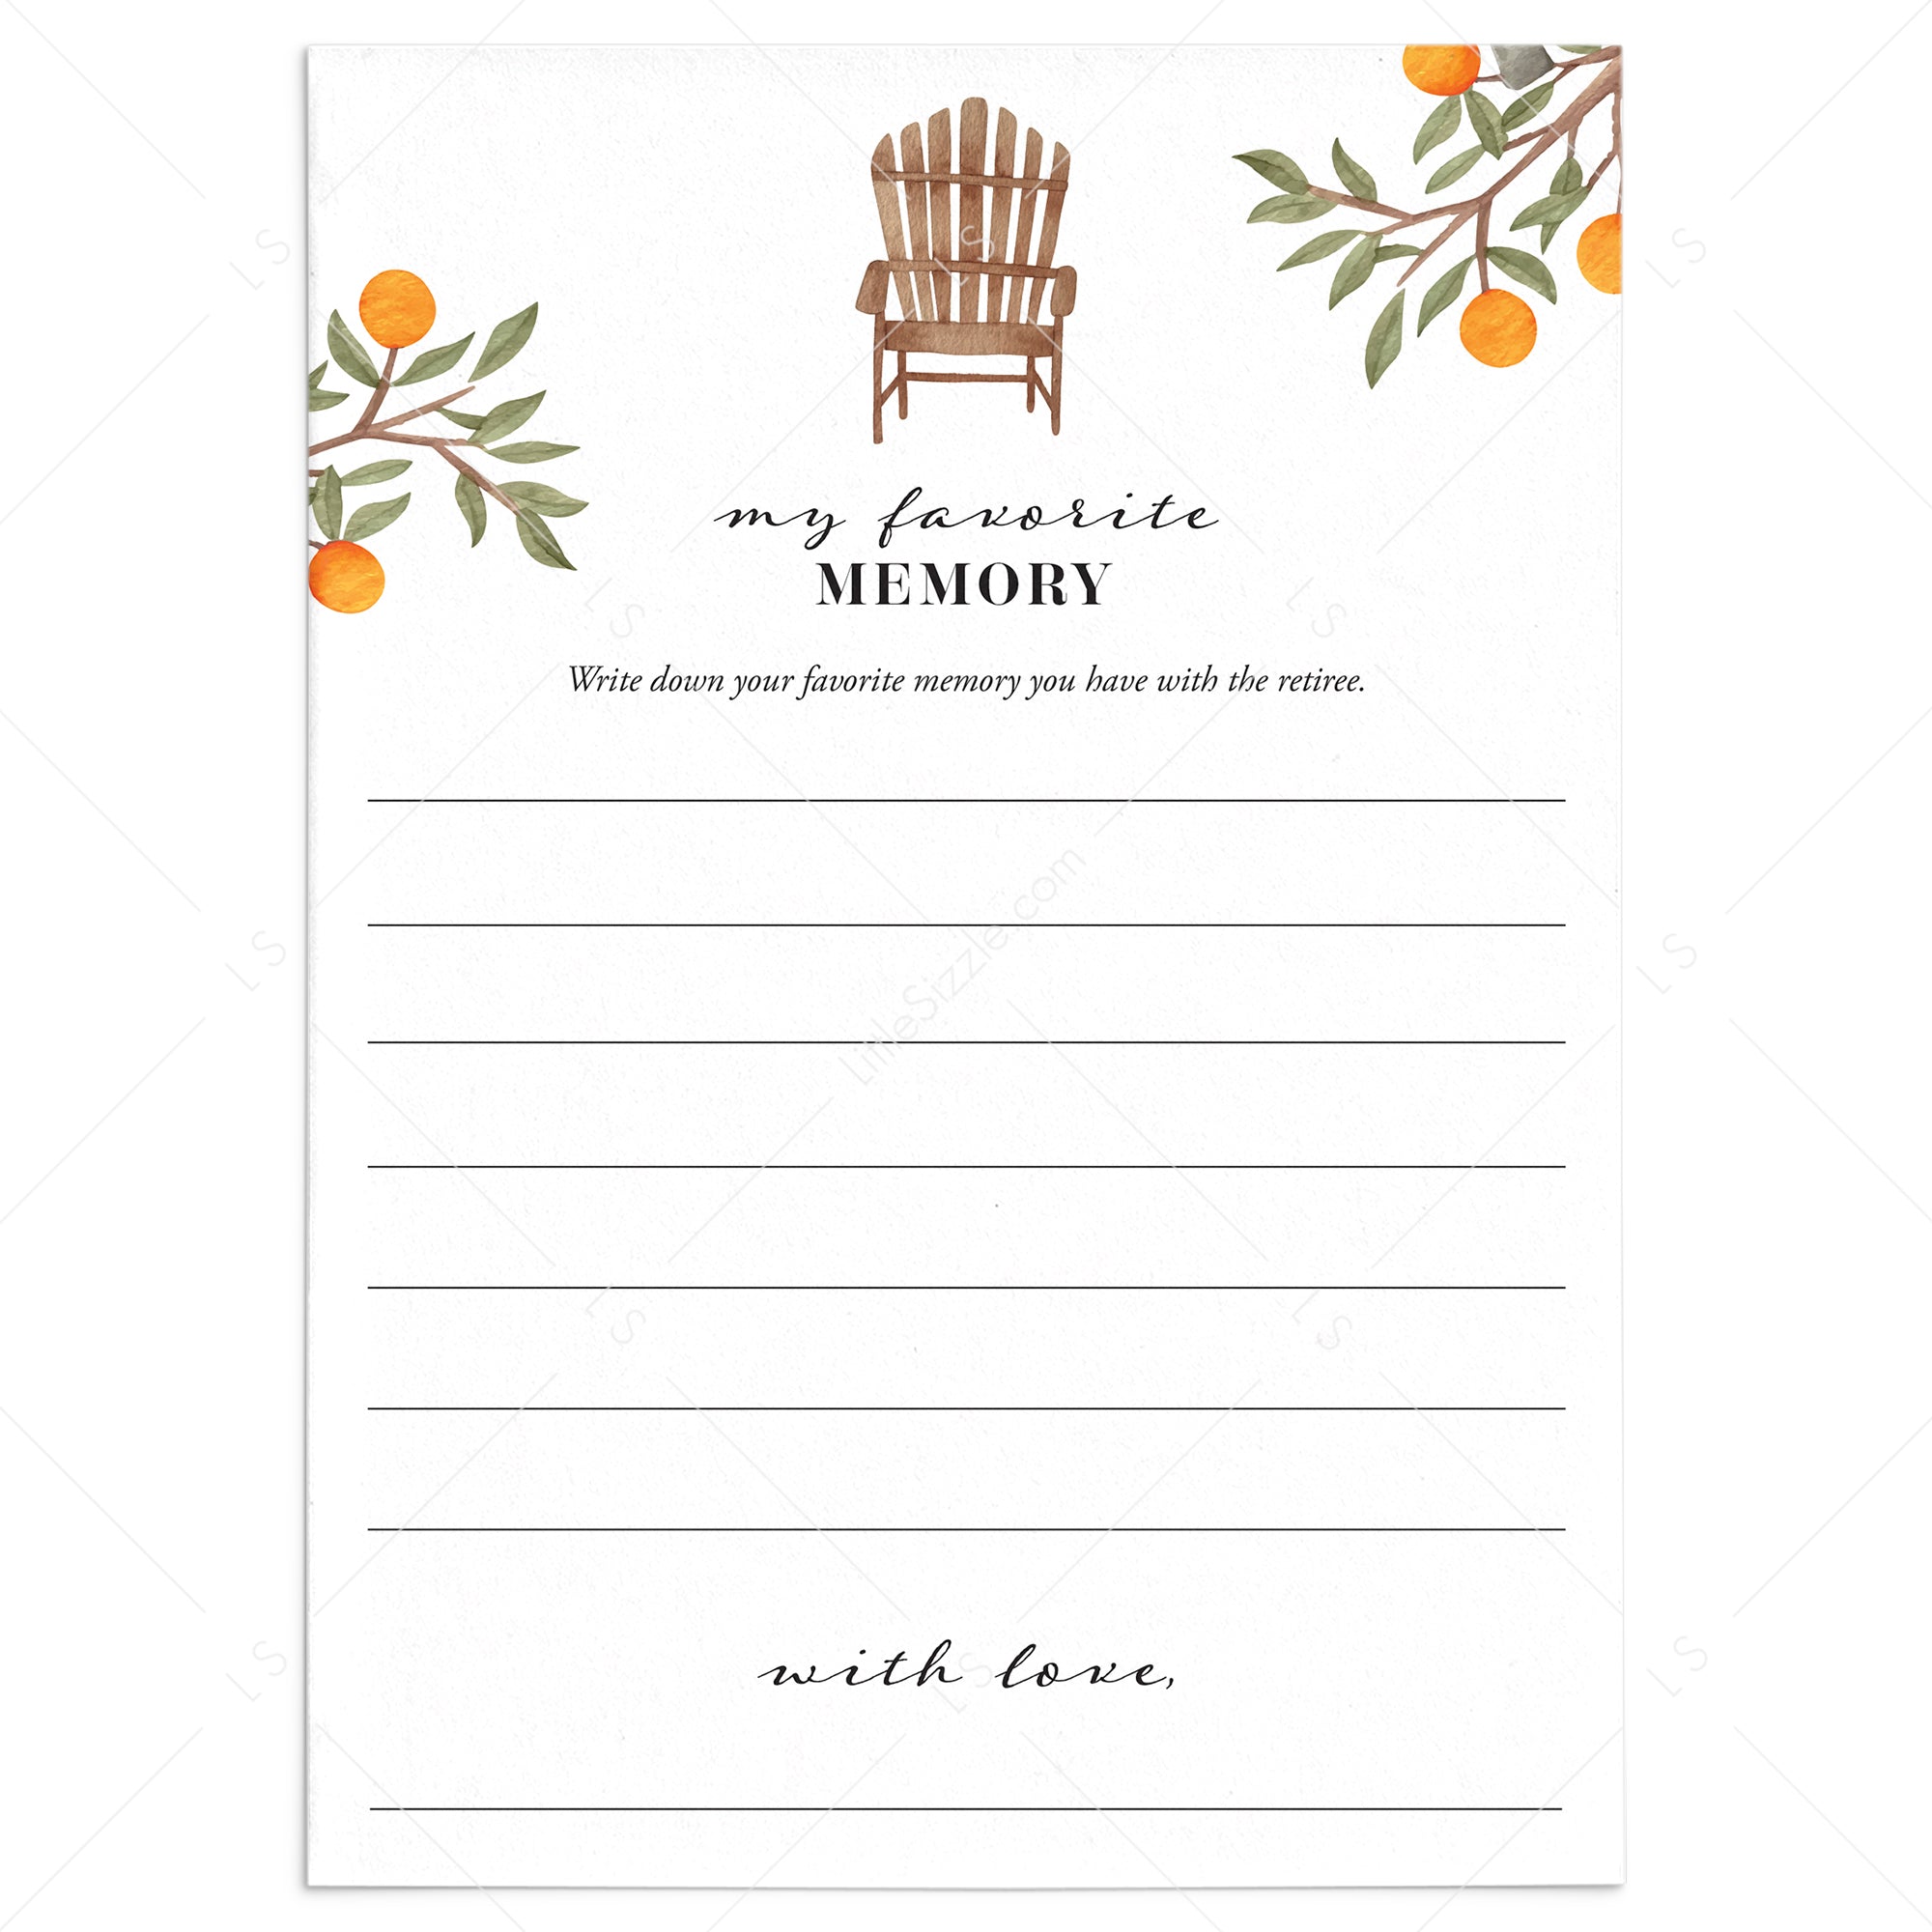 Memory Of The Retiree Cards Printable by LittleSizzle